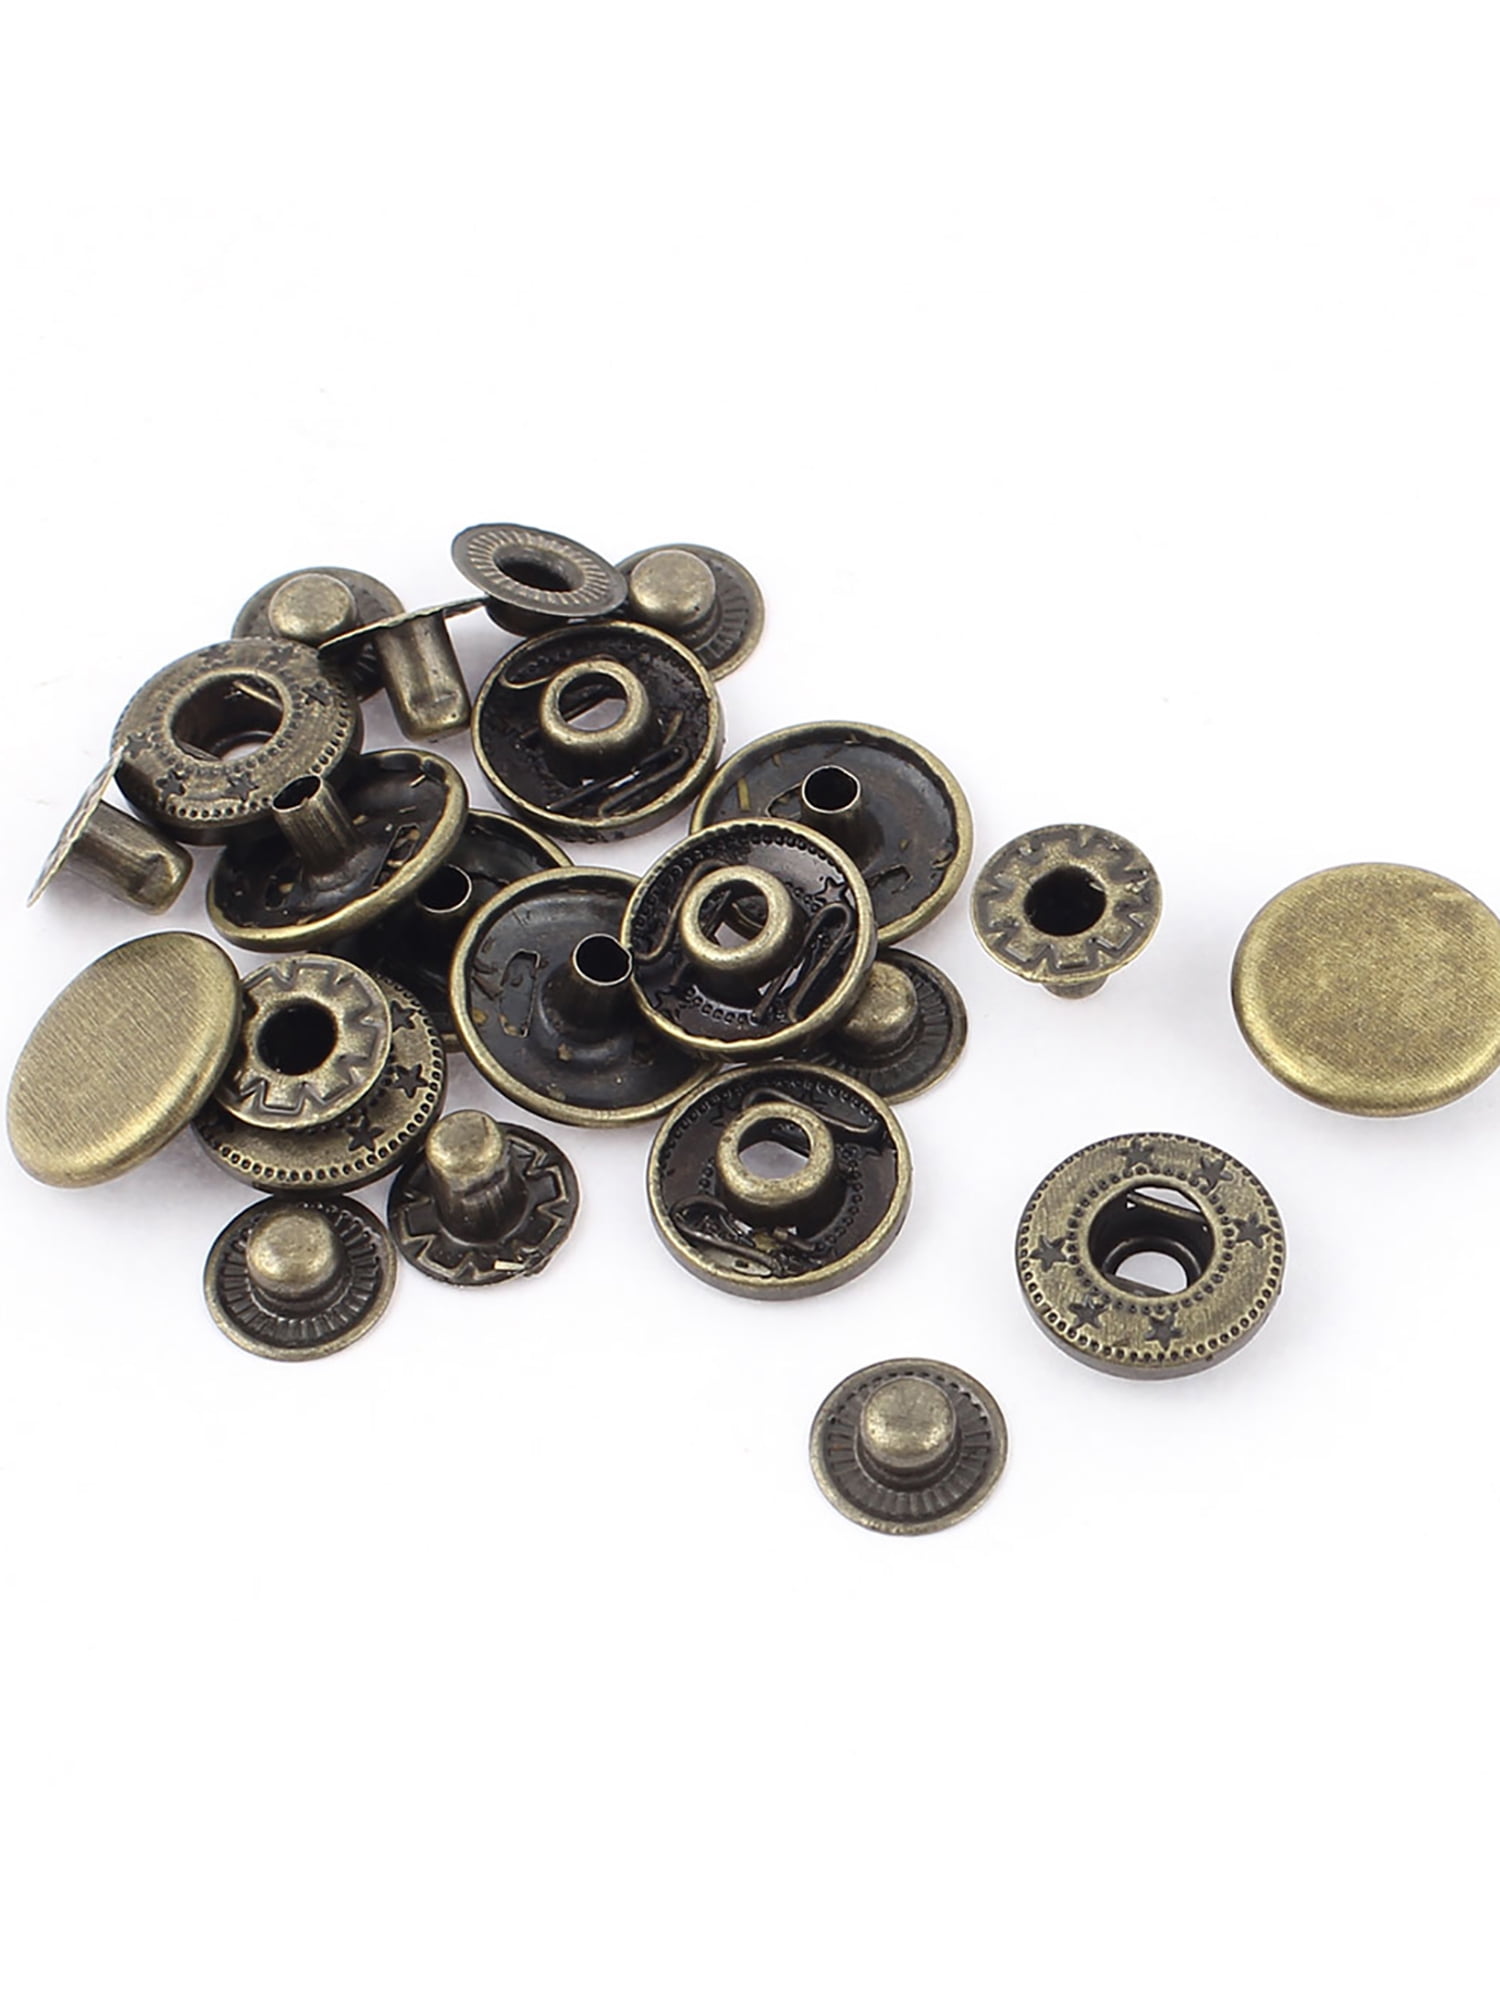 10 sets METAL Poppers Snap Fasteners Press Stud Jeans Tack NO SEW BOUTONS 17 mm 